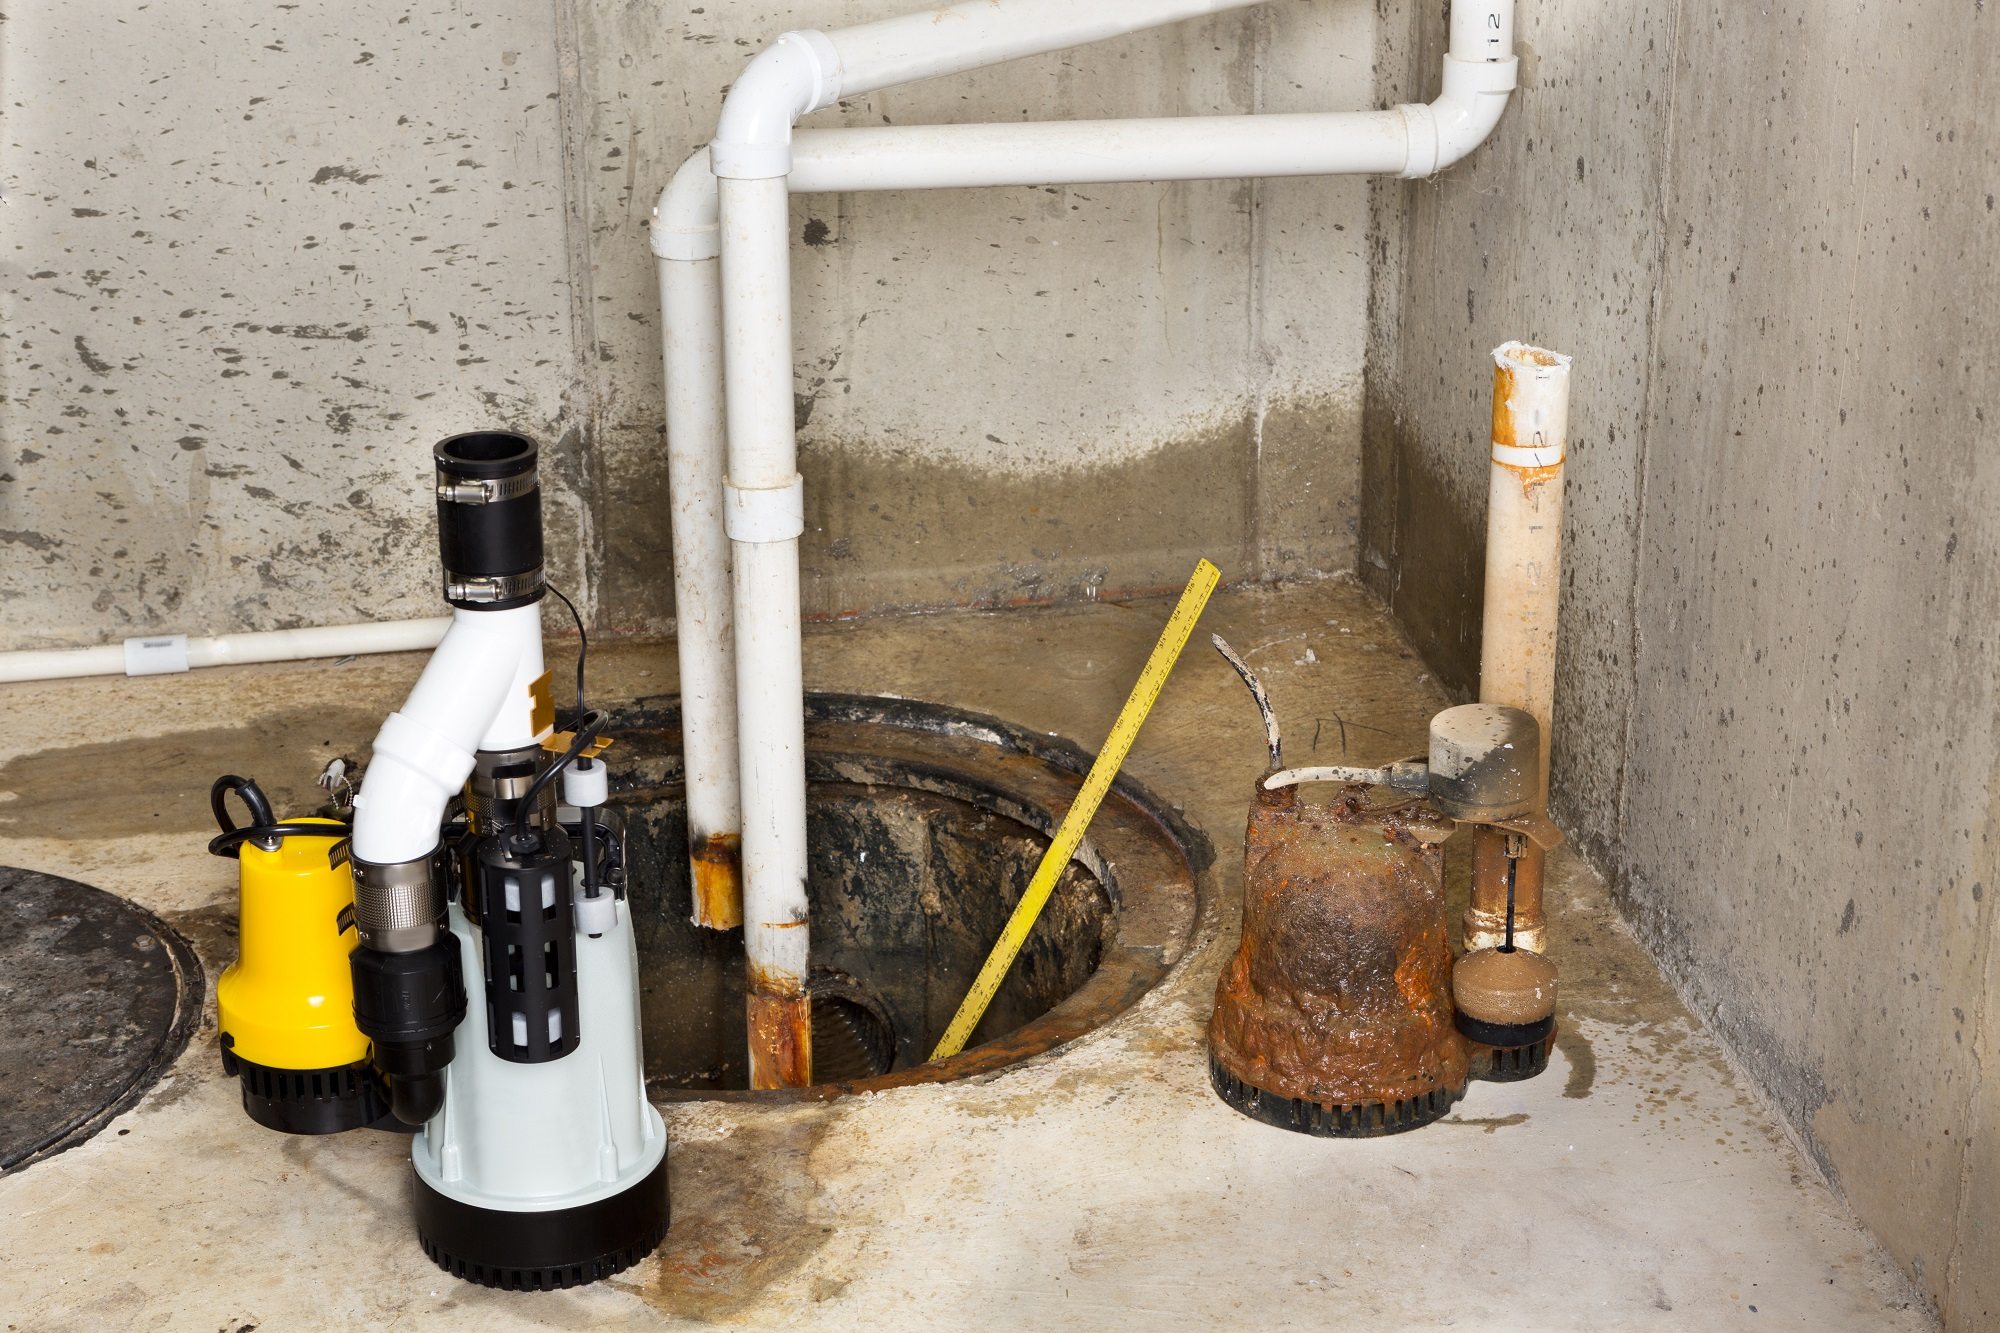 wet basement solutions - ann arbor water damage repair and mold remediation services